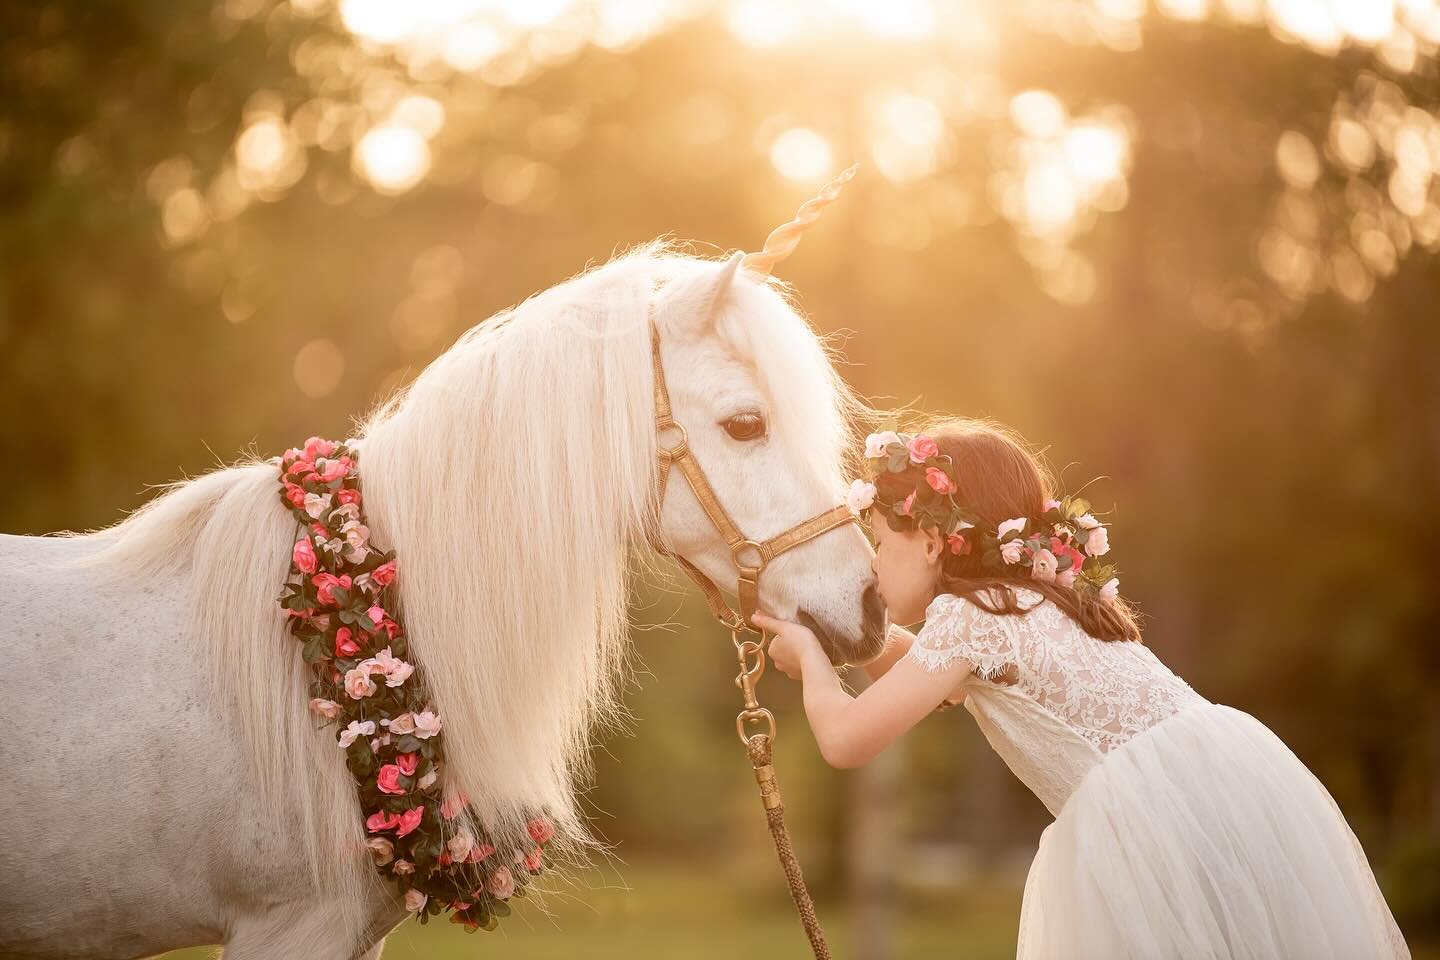 Unicorn Mini-Sessions 5/18 🦄🩷 Join us for a magical photo experience with @squinlanequine. 

https://book.usesession.com/s/DbJuz5hzE 

#wilmingtonnc #unicorn #wilmingtonminisession #horse #unicornsession #wilmingtonncphotographer #horsegirl #horsel